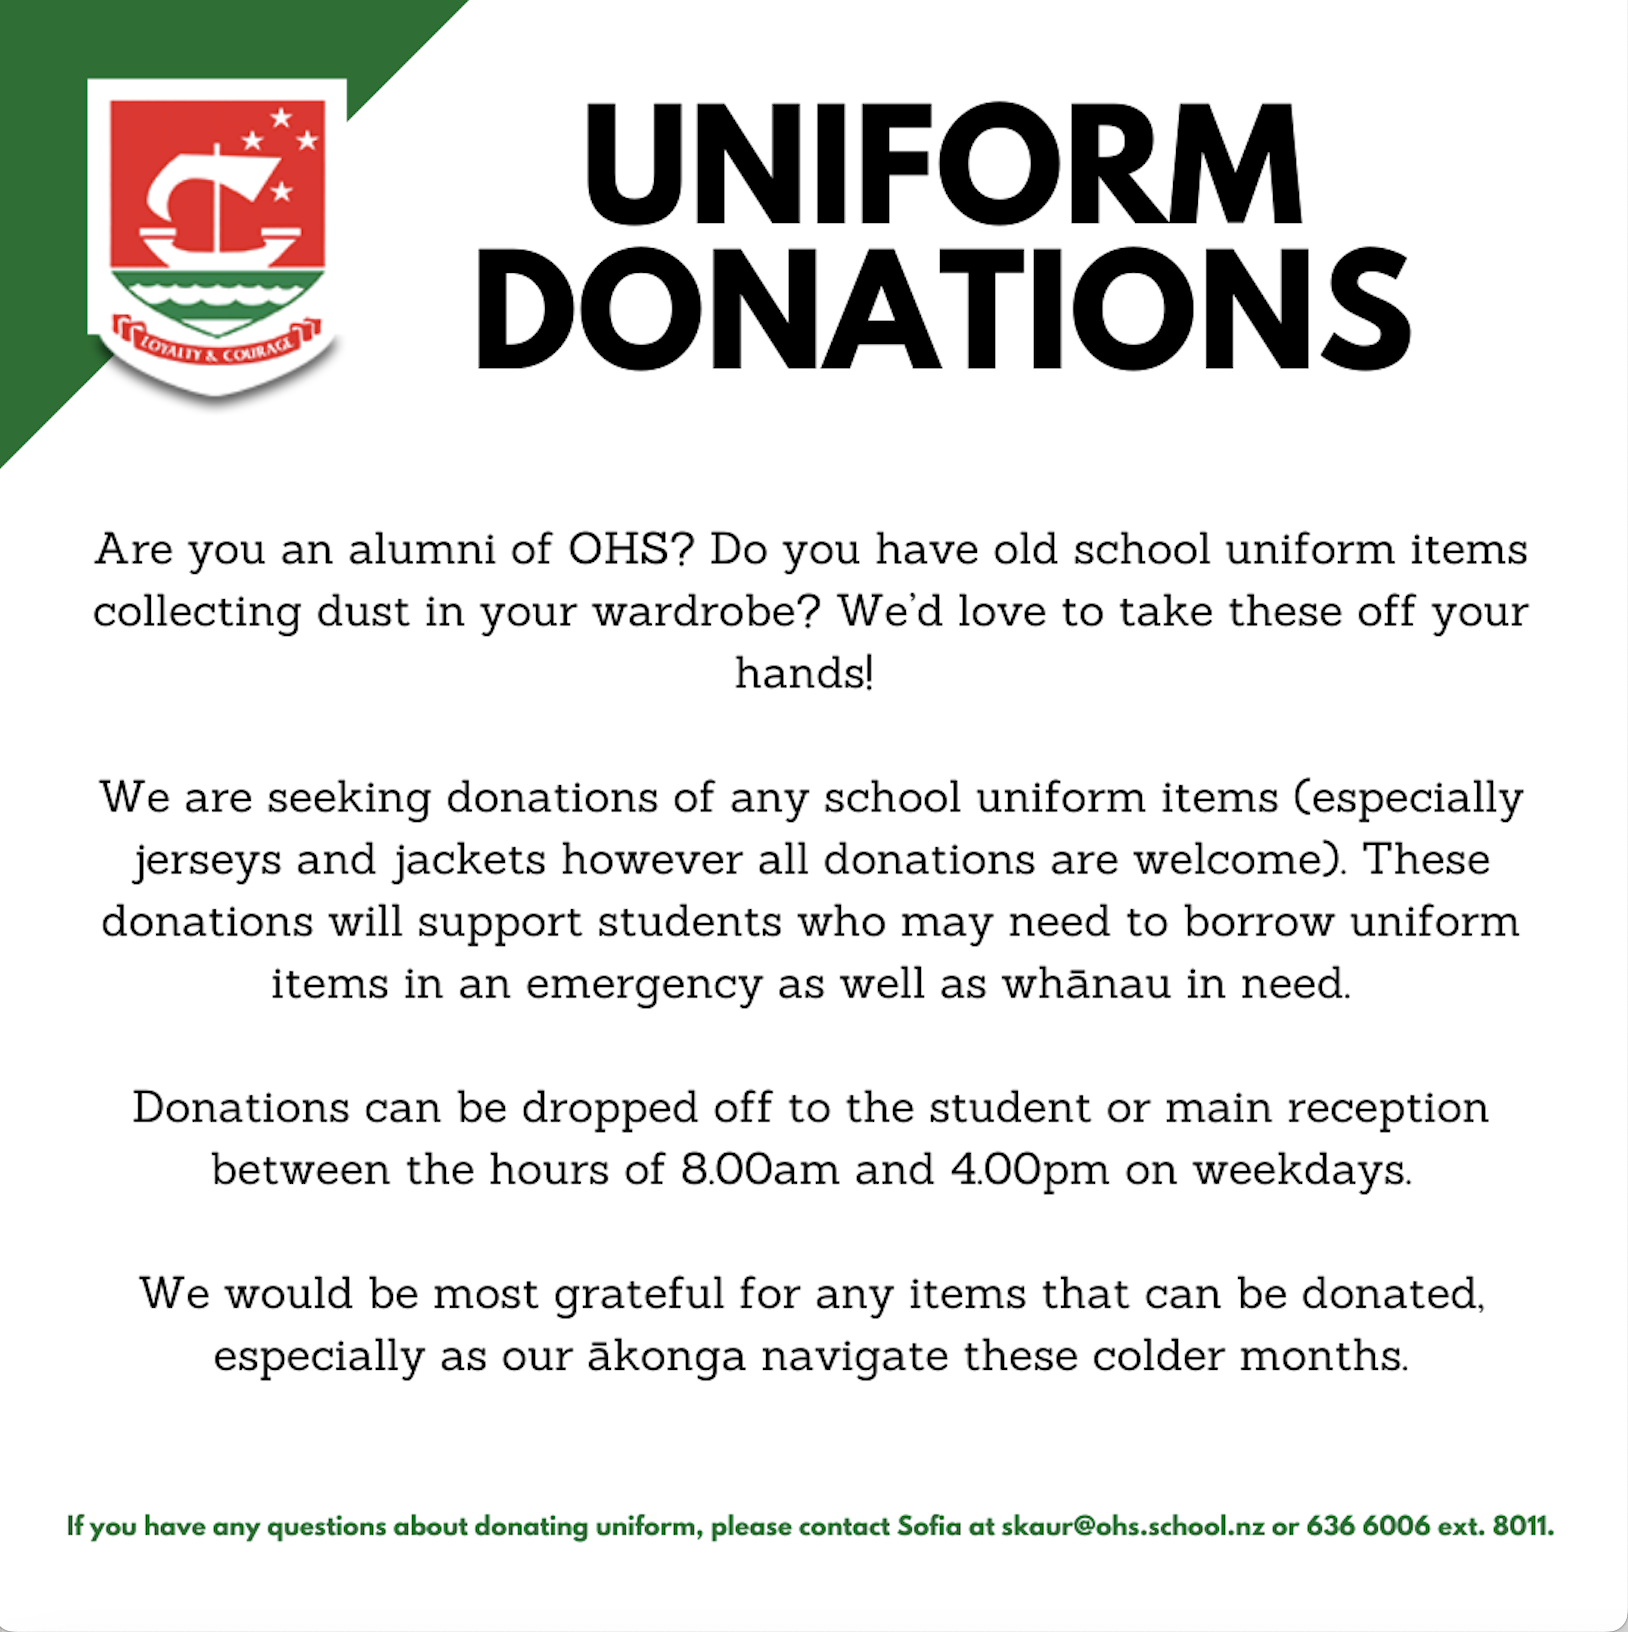 UNIFORM DONATIONS WELCOME